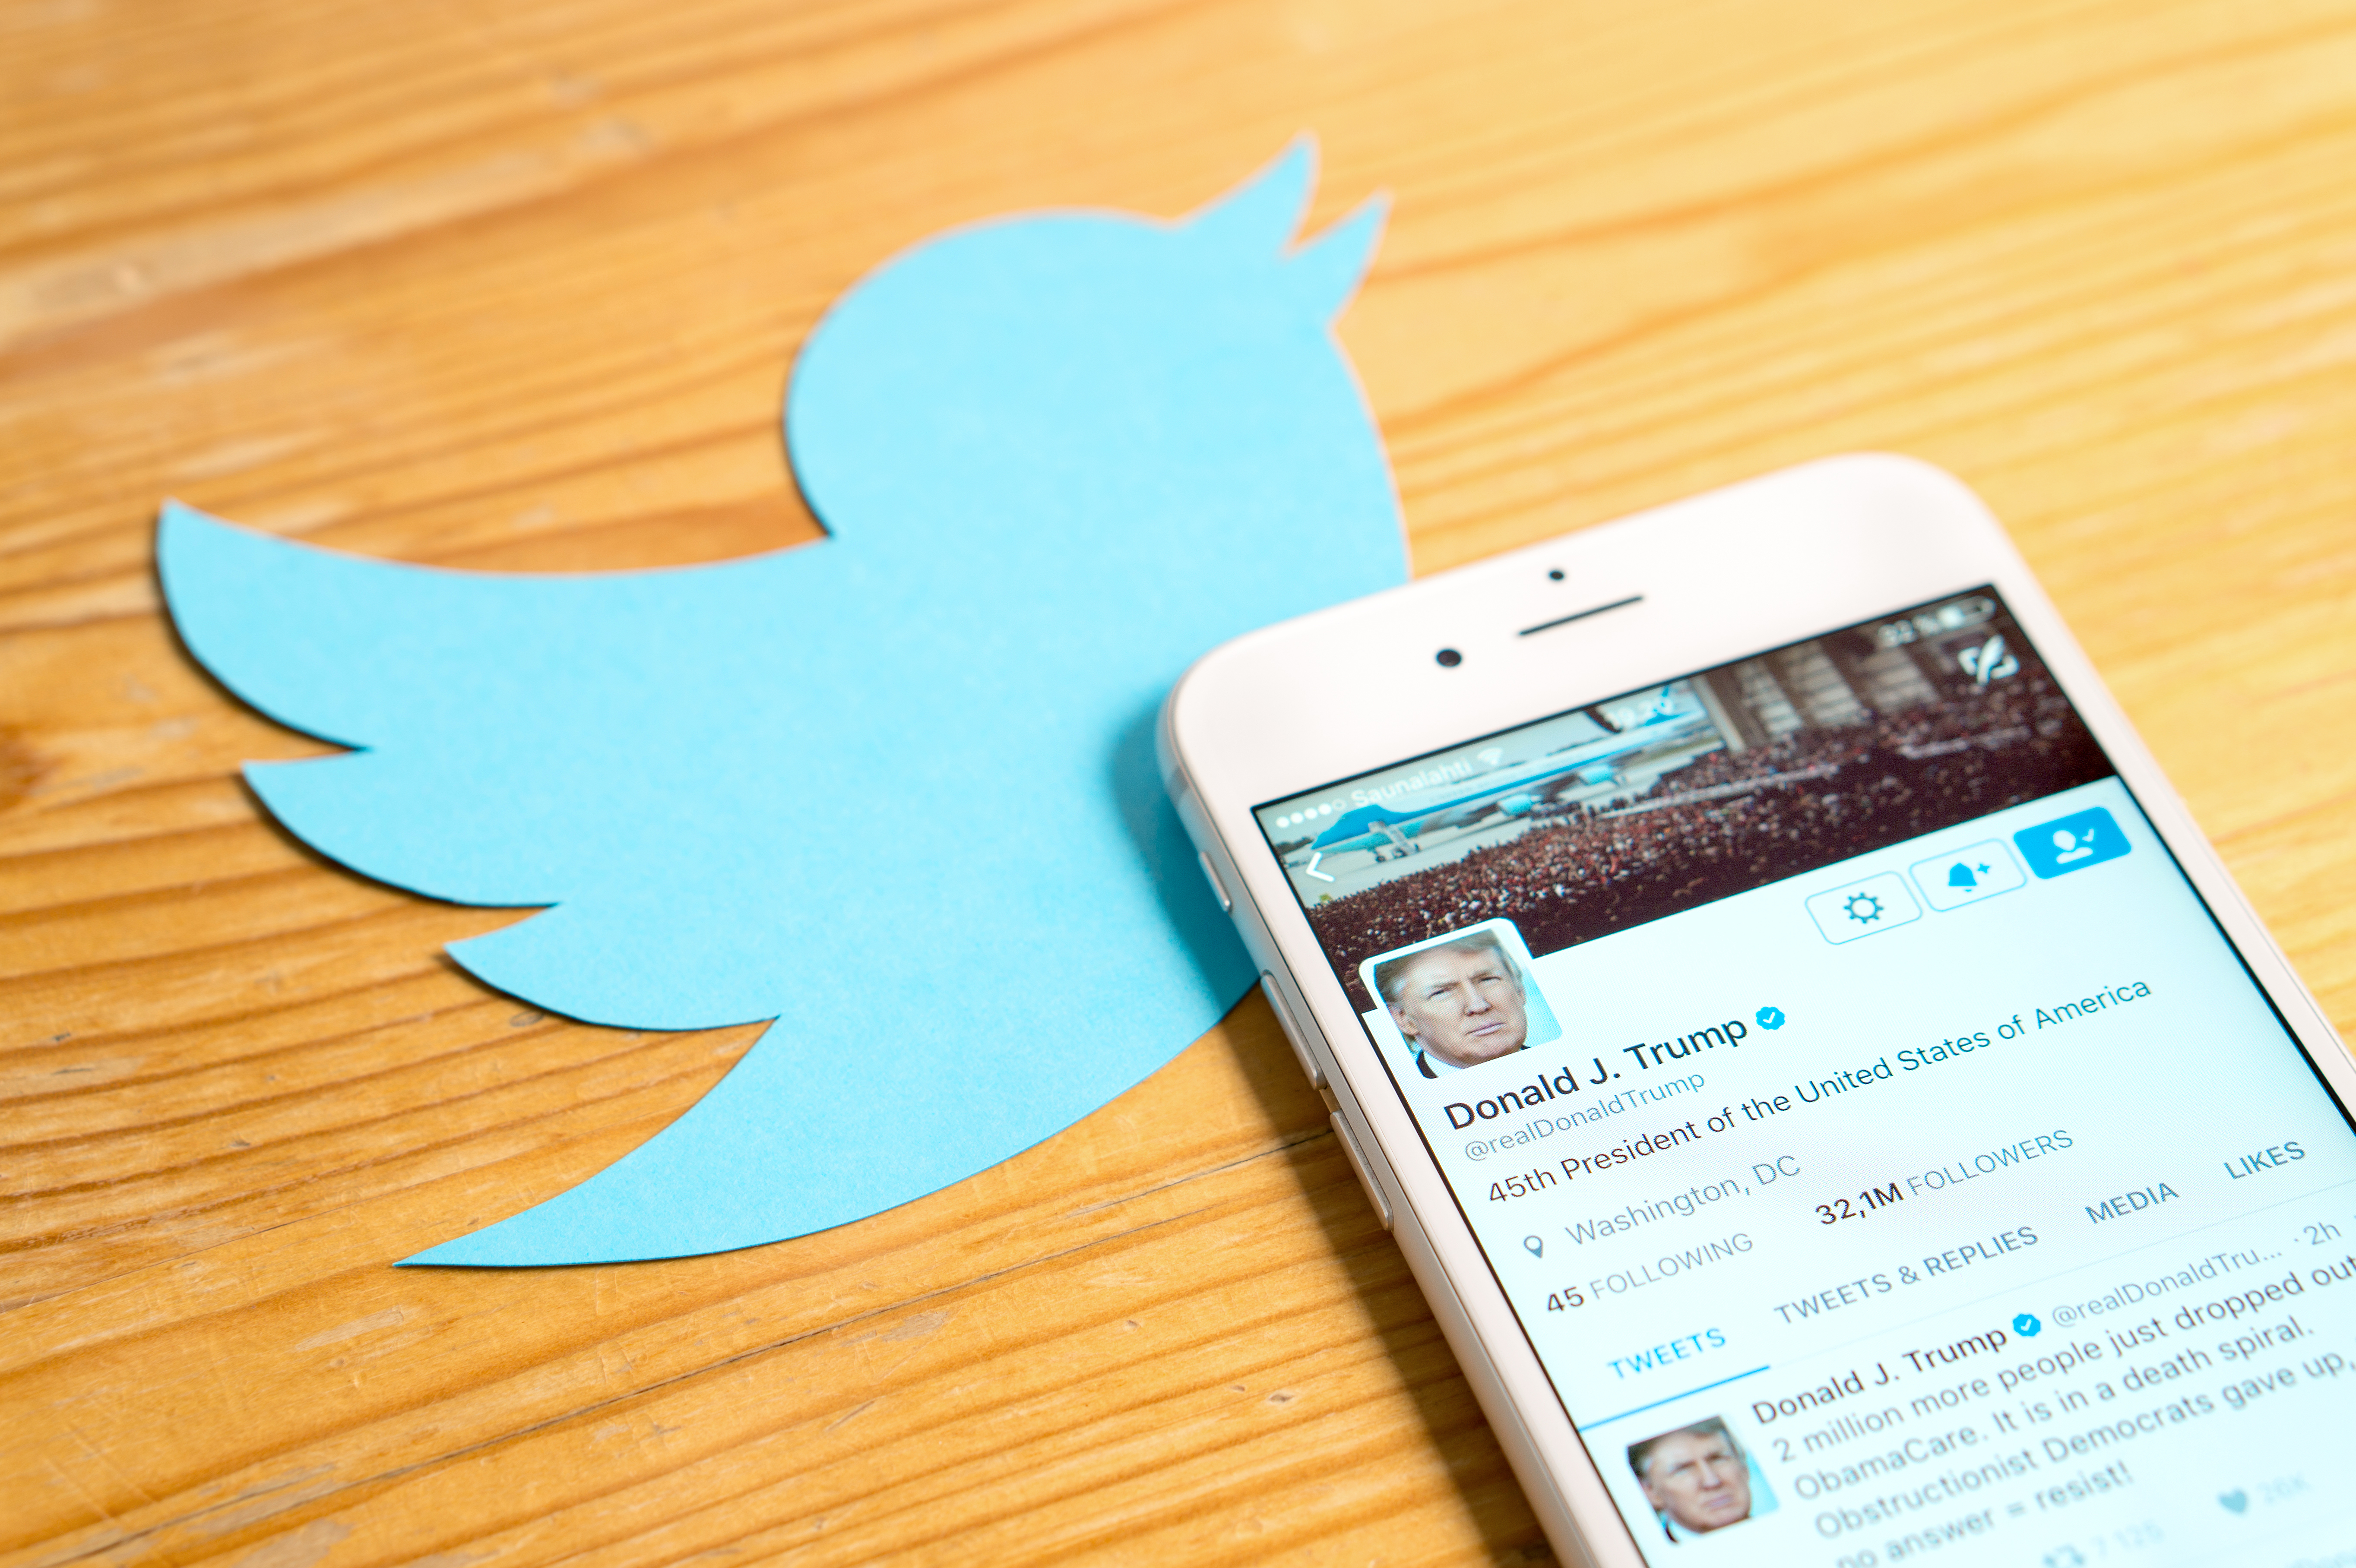 Phone with Donald Trump's Twitter account atop a cut out Twitter logo